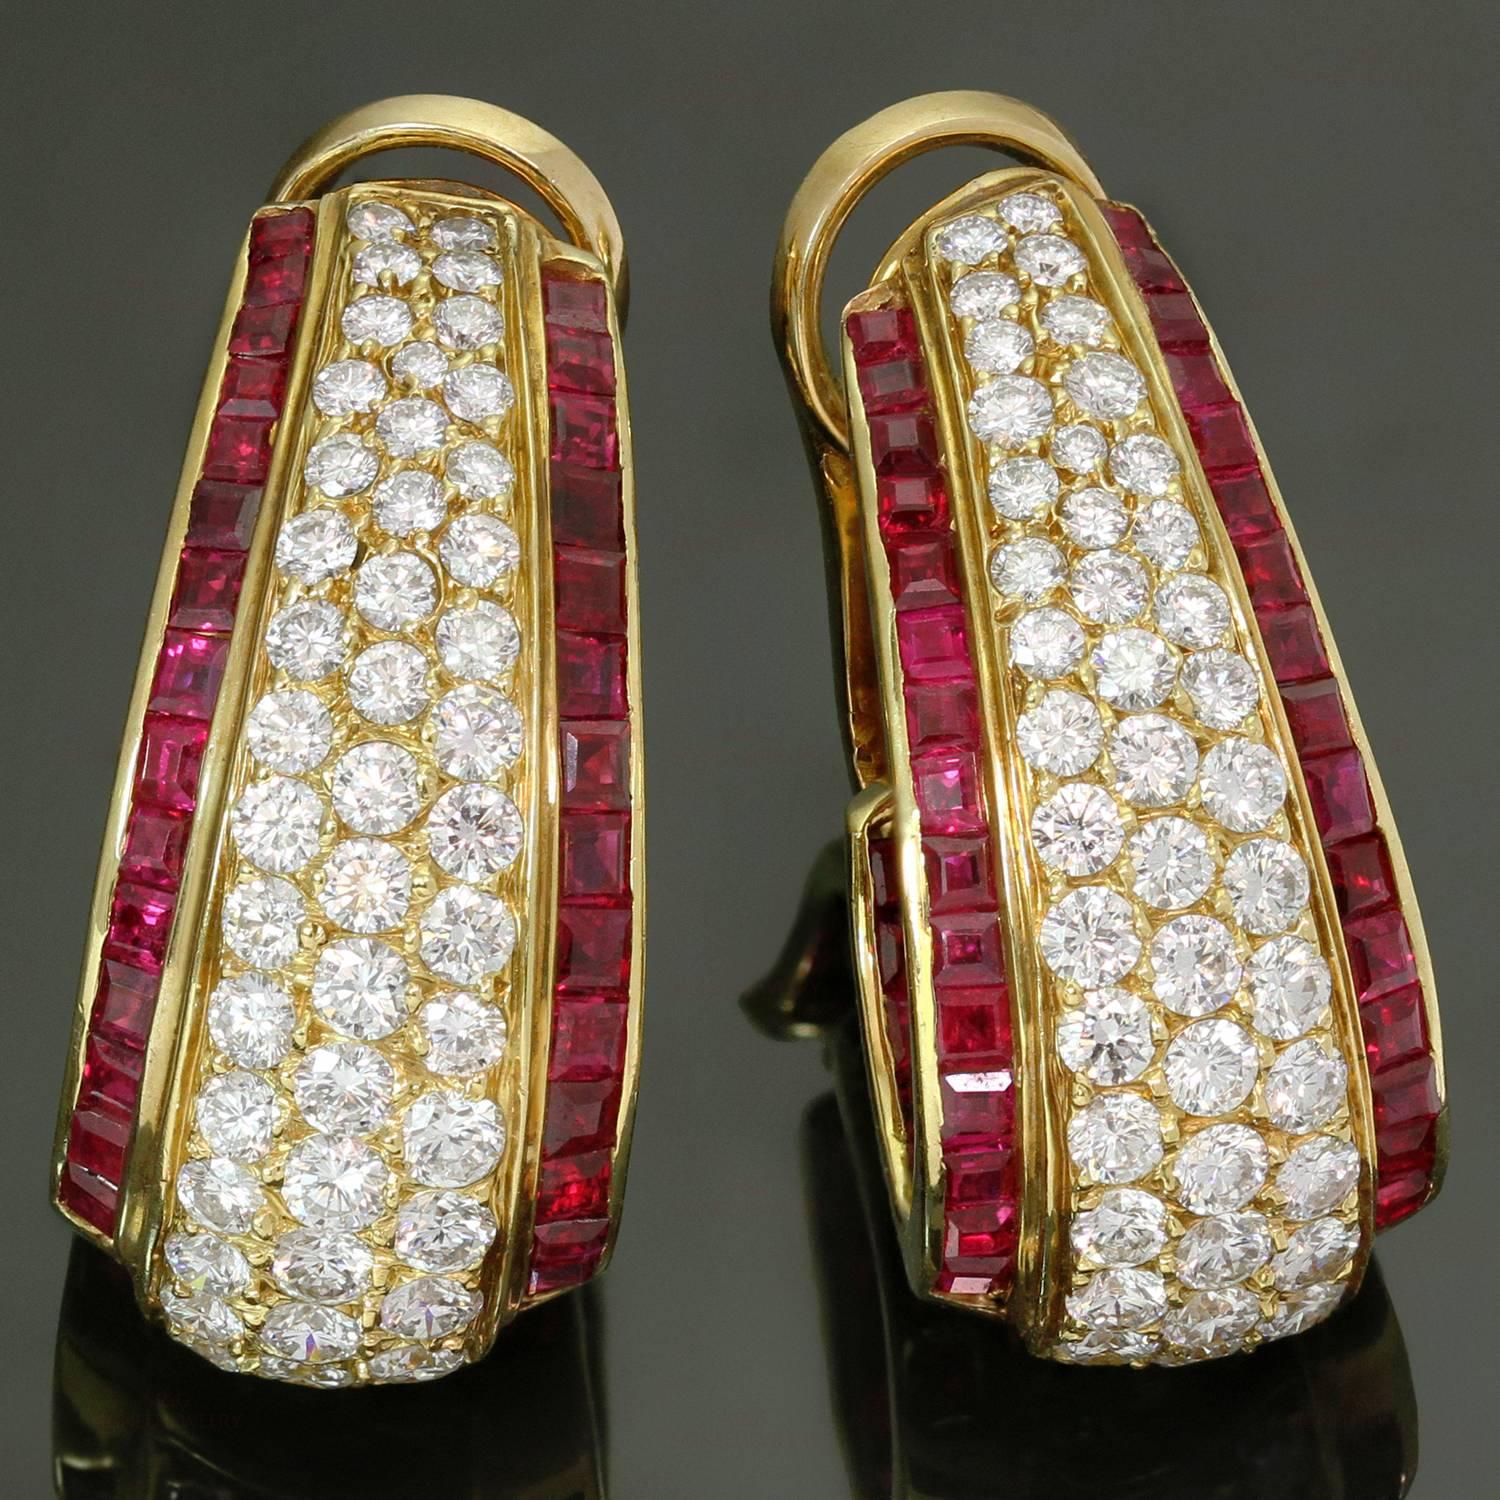 These elegant Van Cleef & Arpels clip-on earrings feature full-cut sparkling diamonds accented by vividly deep red square-shaped rubies set in 18k yellow gold. Posts can be added upon request for pierced ears. Simply stunning.
12mm (1/2